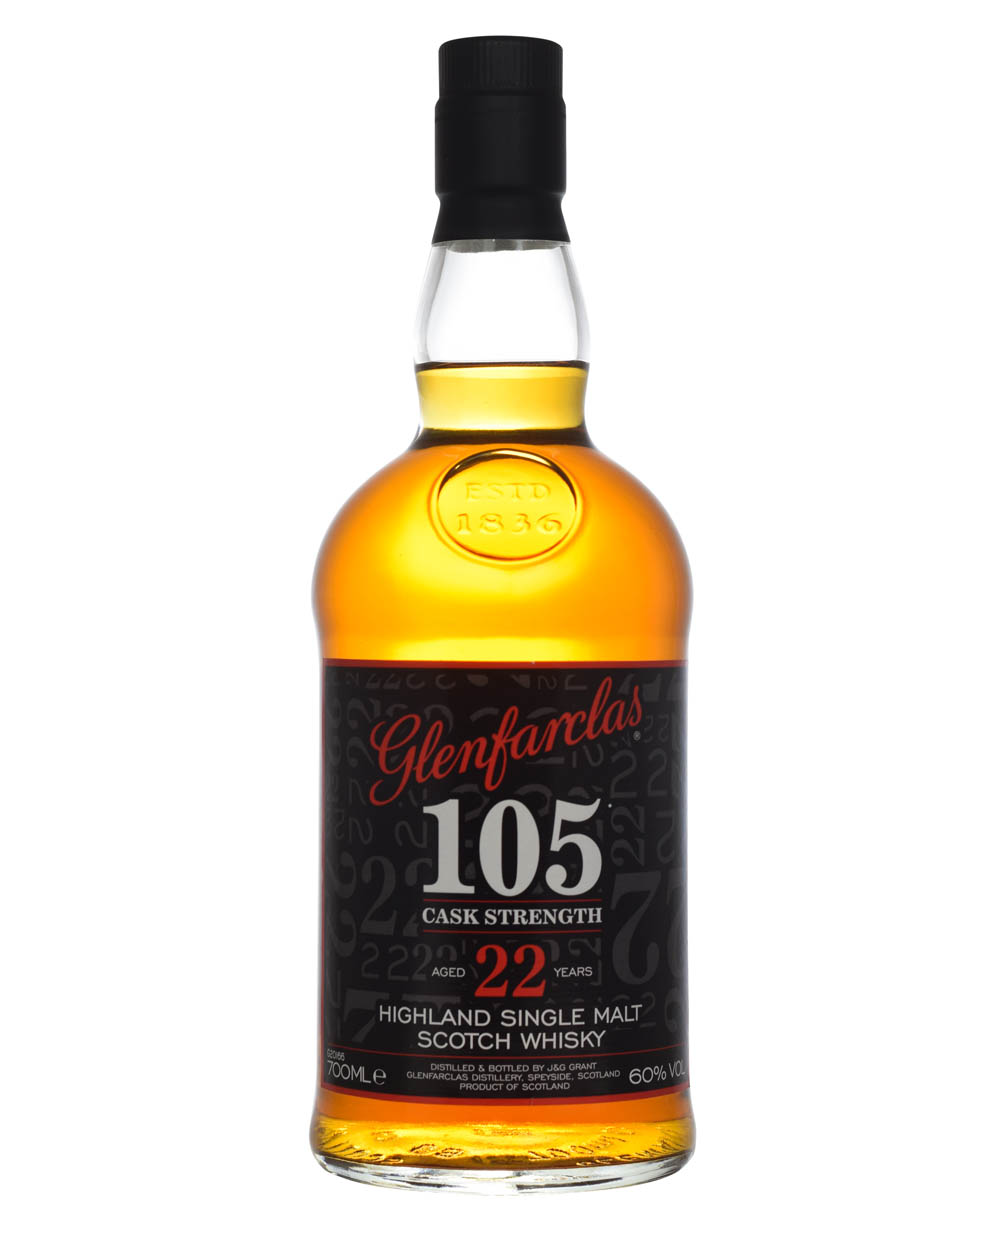 Glenfarclas 105 Cask Strength 22 Years Old Musthave Malts MHM